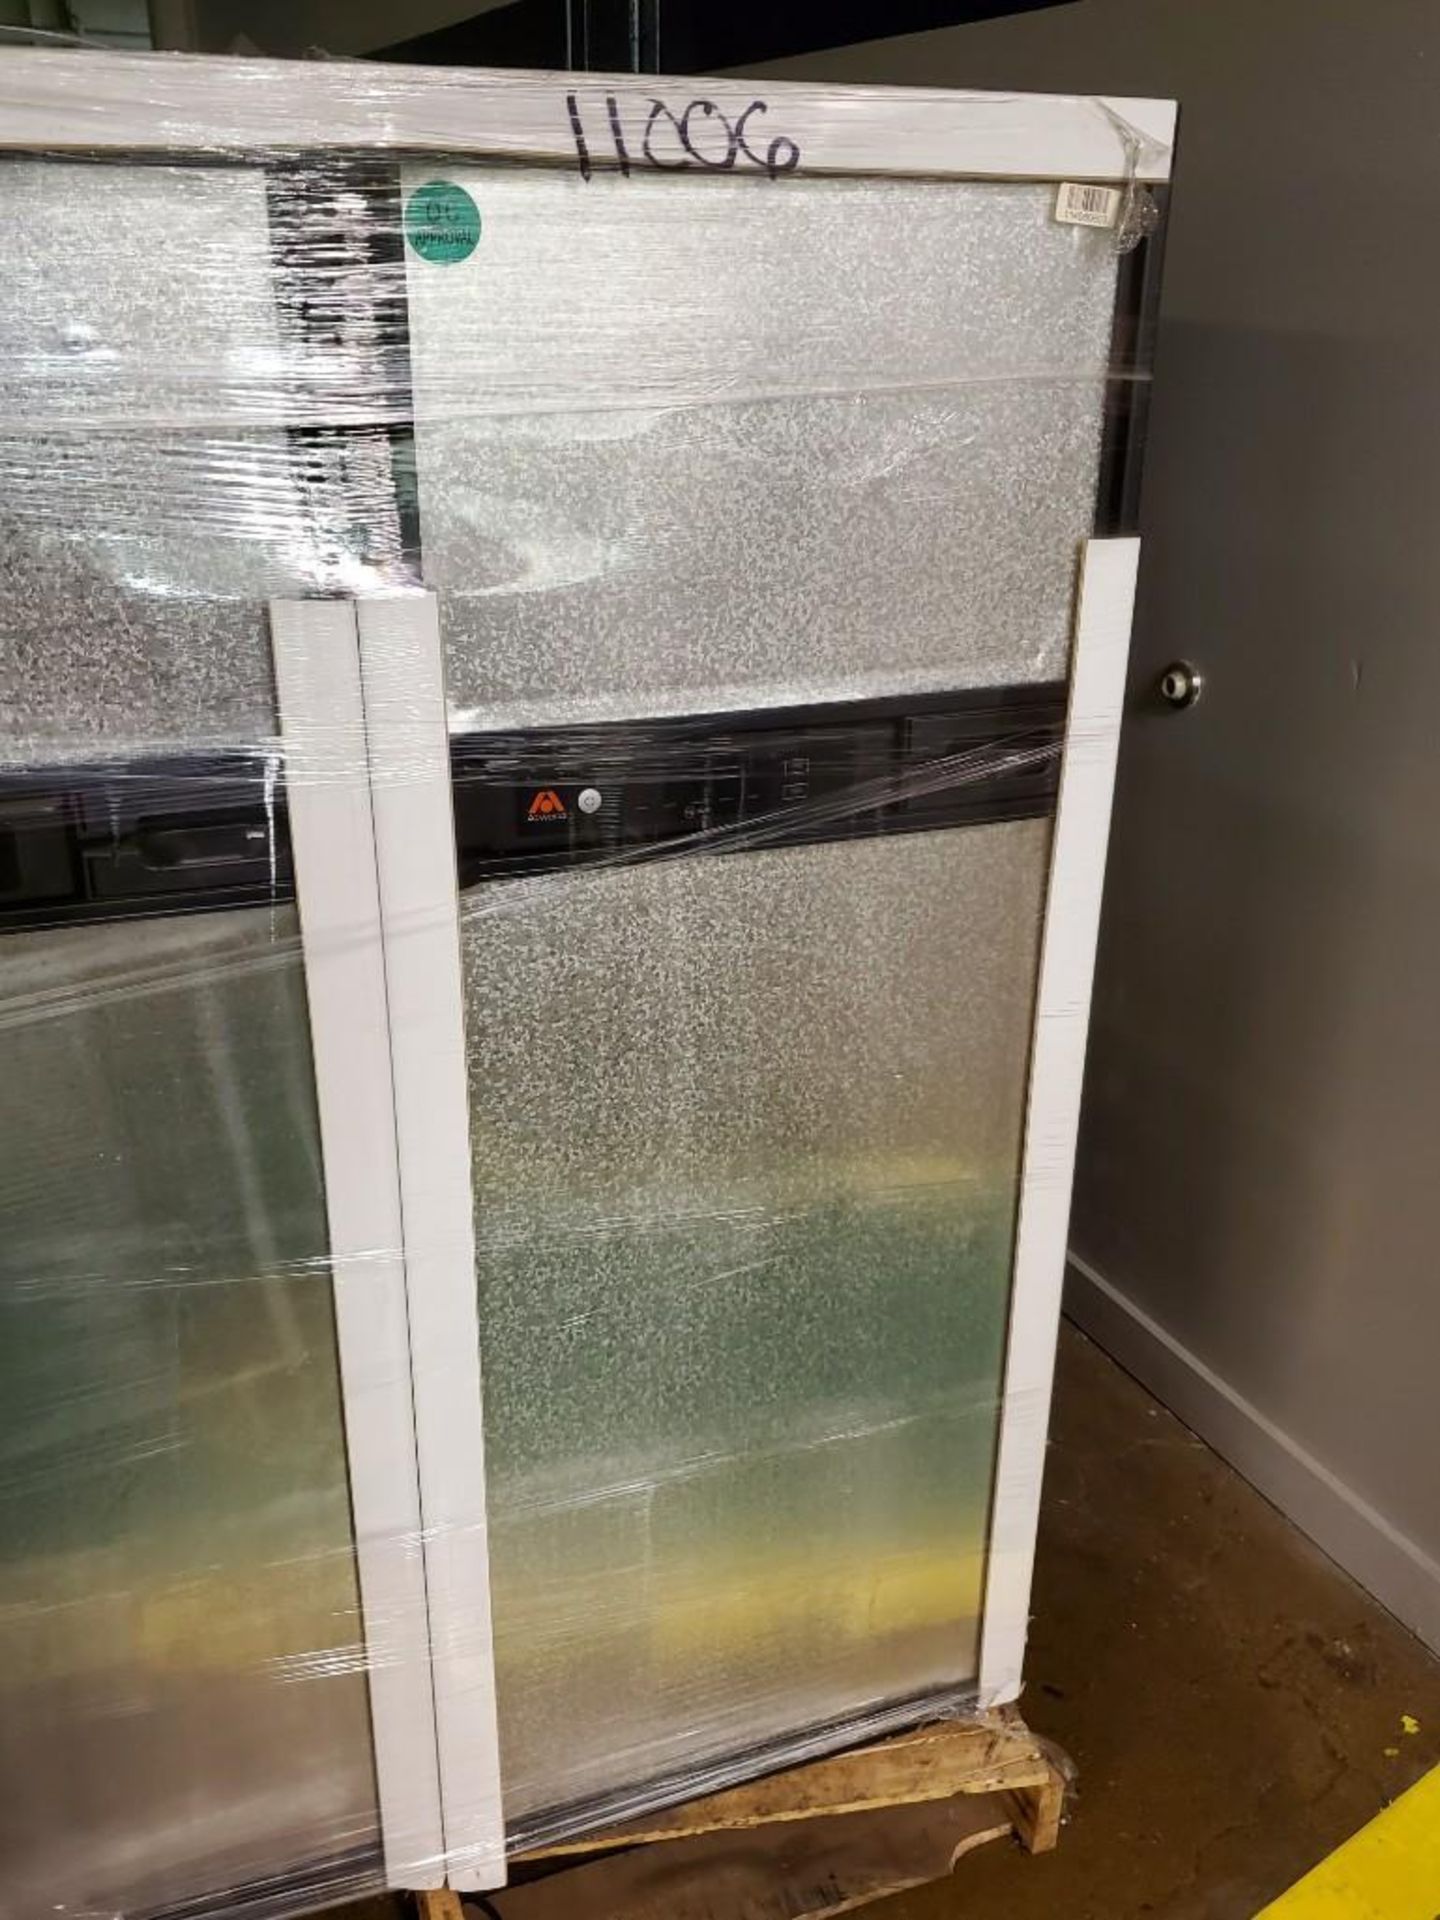 Qty 4 - Atwood refrigerator. Model HE-0801LF, 8 cu ft. Left hinged door with fan slide out. New. - Image 2 of 3